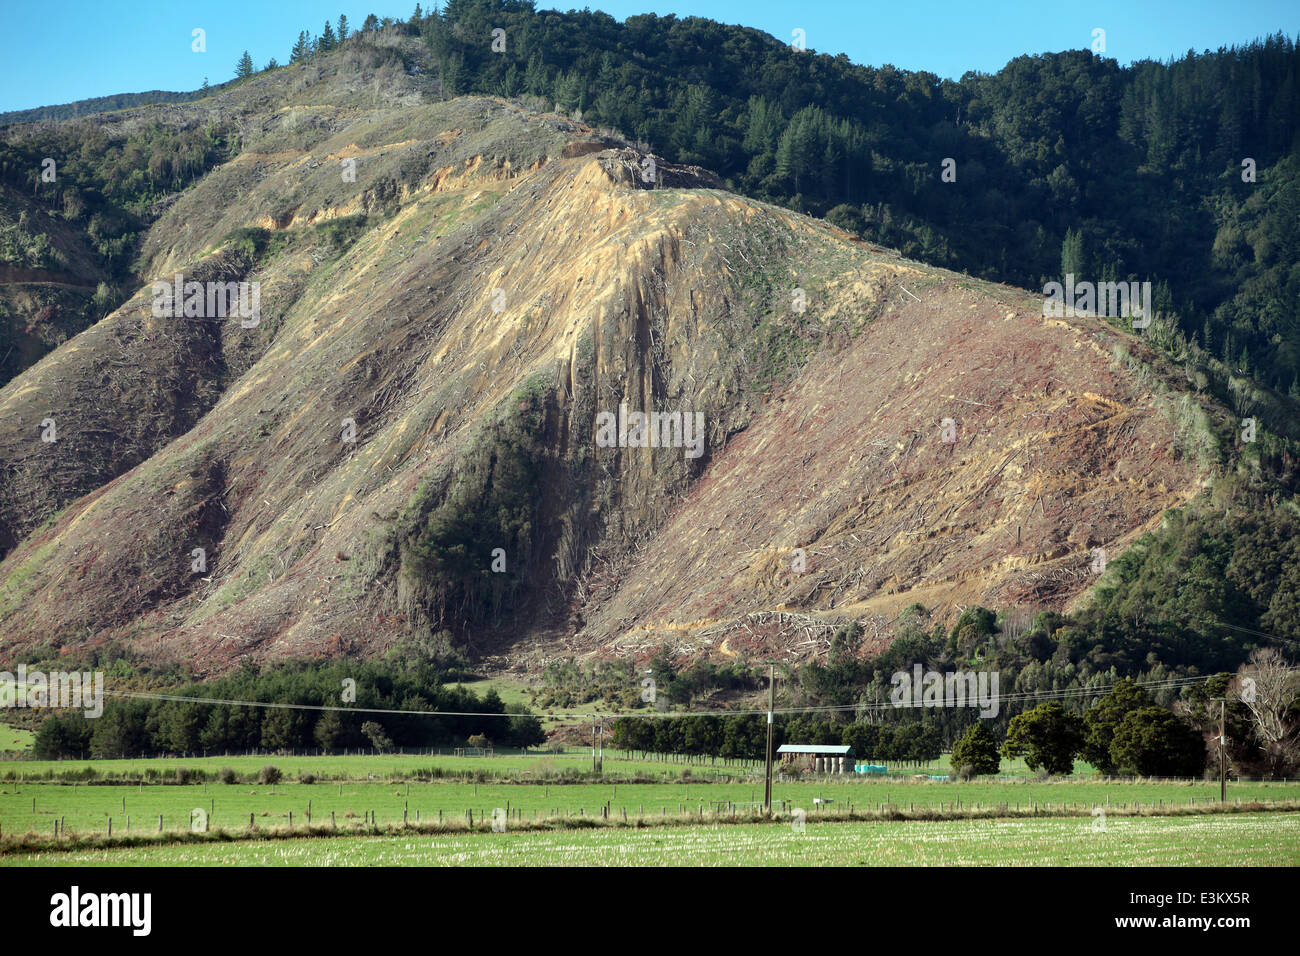 Hillside scarred by logging activity, between Picton and Blenheim, Marlborough, New Zealand Stock Photo